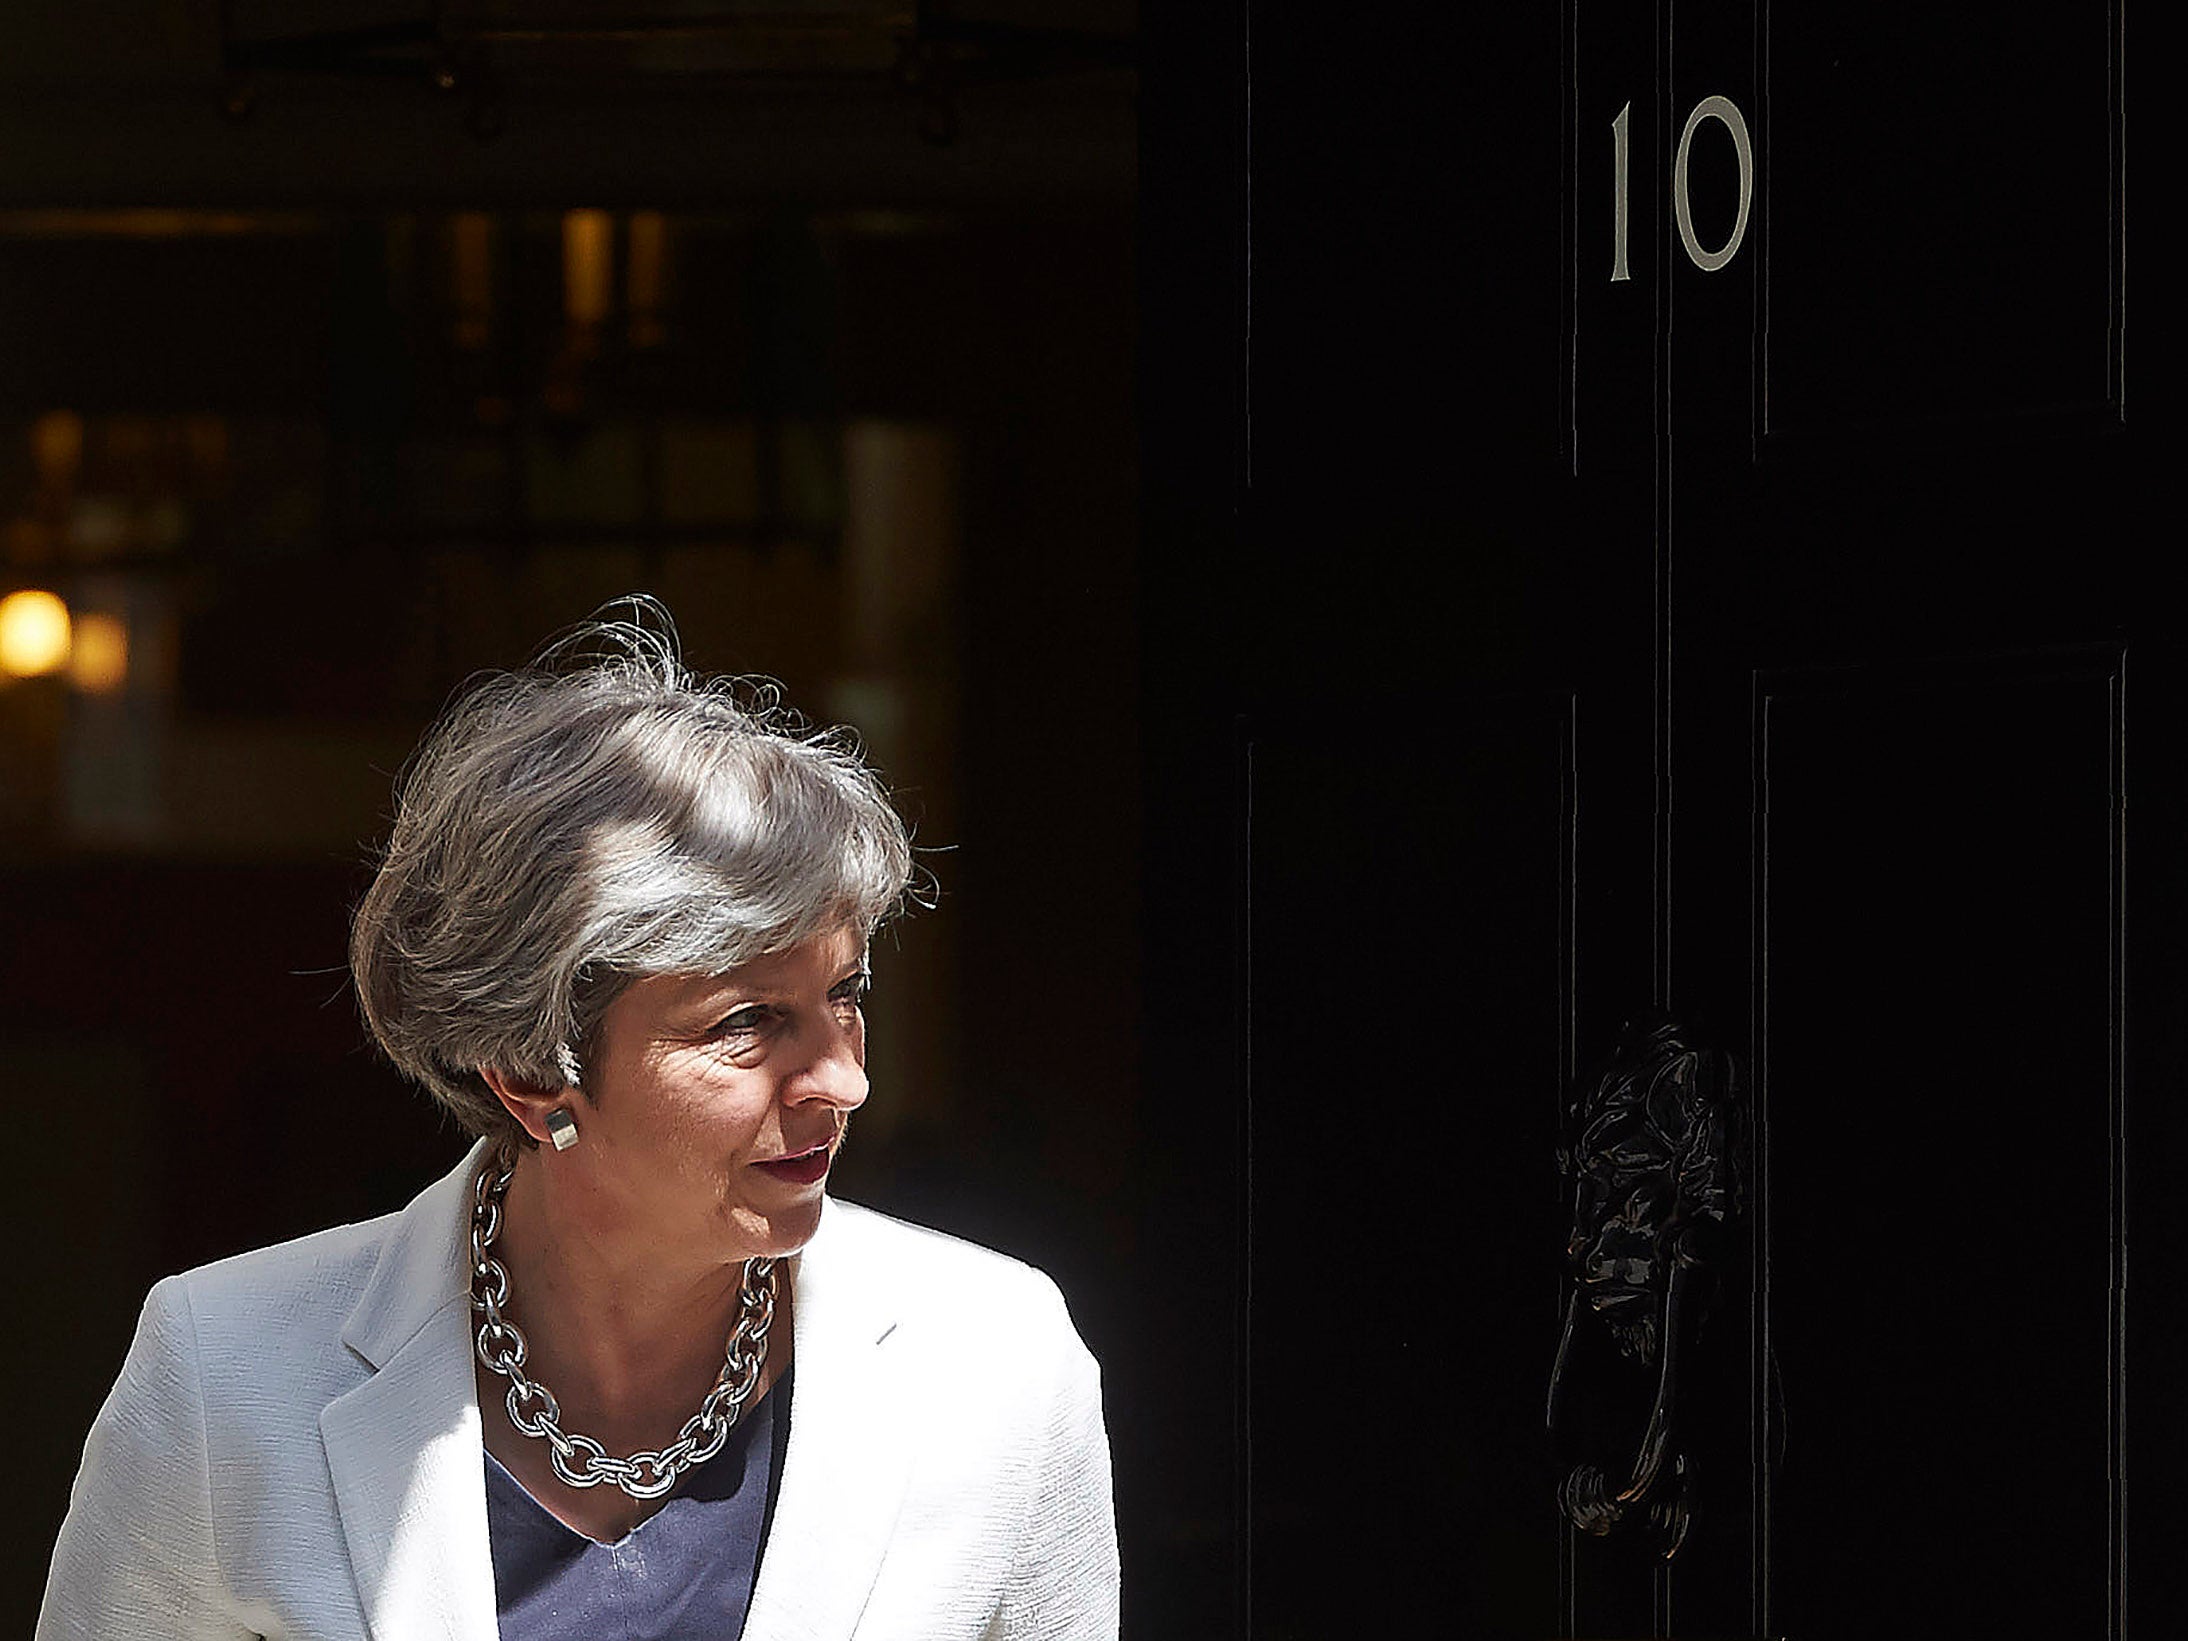 Theresa May is set to give a speech later in the summer on divorce proposals